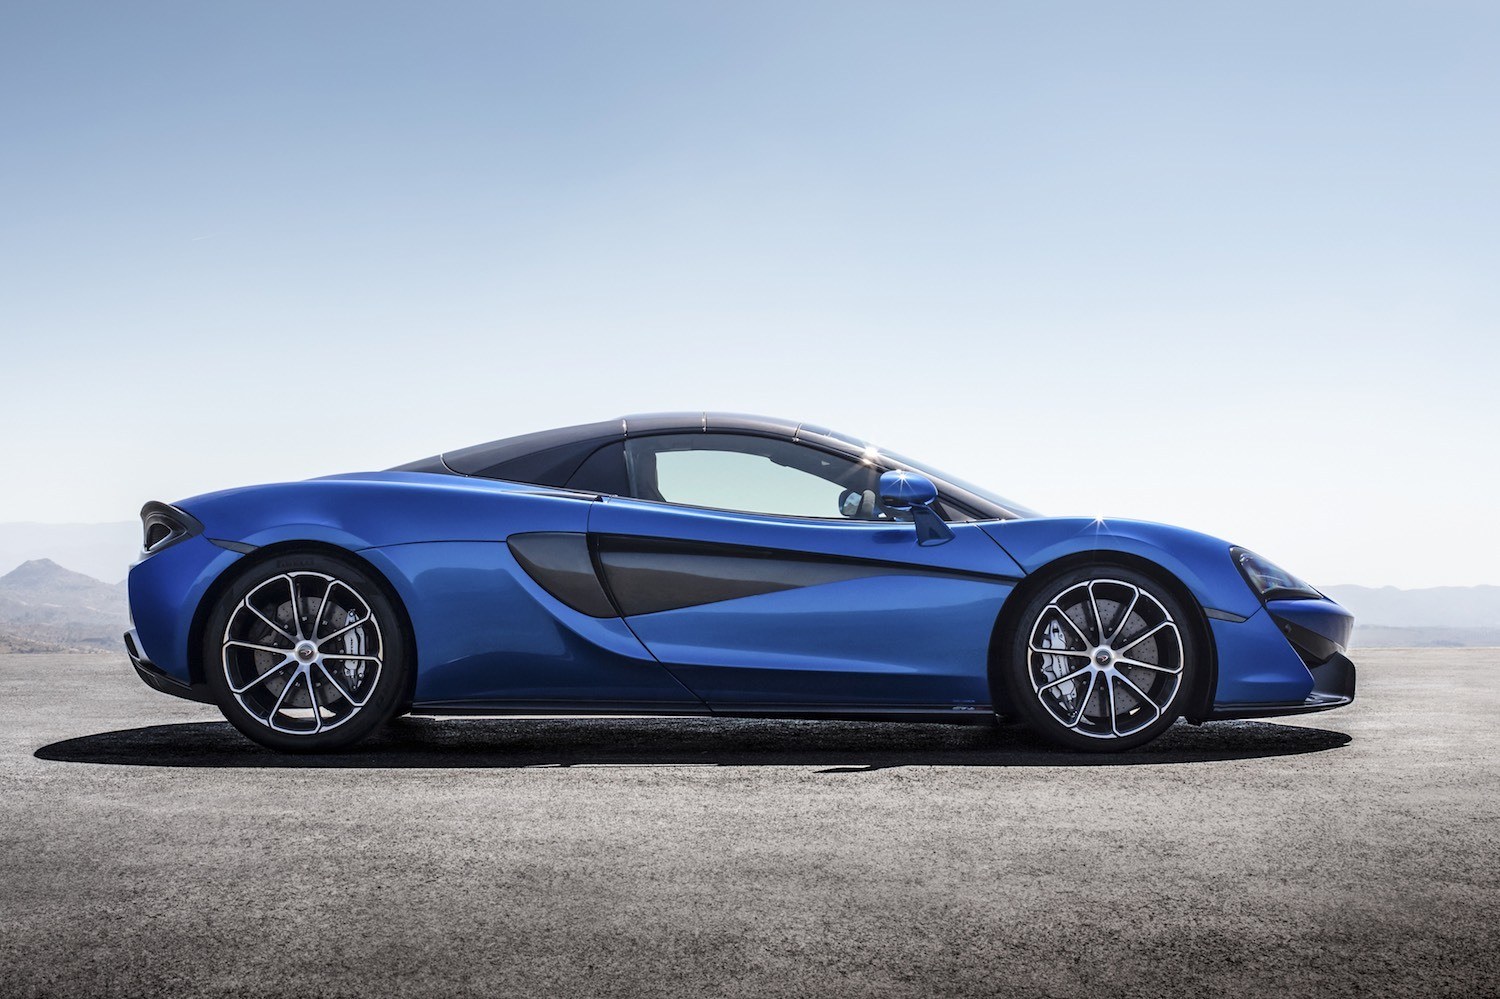 Neil Lyndon reviews the latest New McLaren 720S Spider for Drive 6